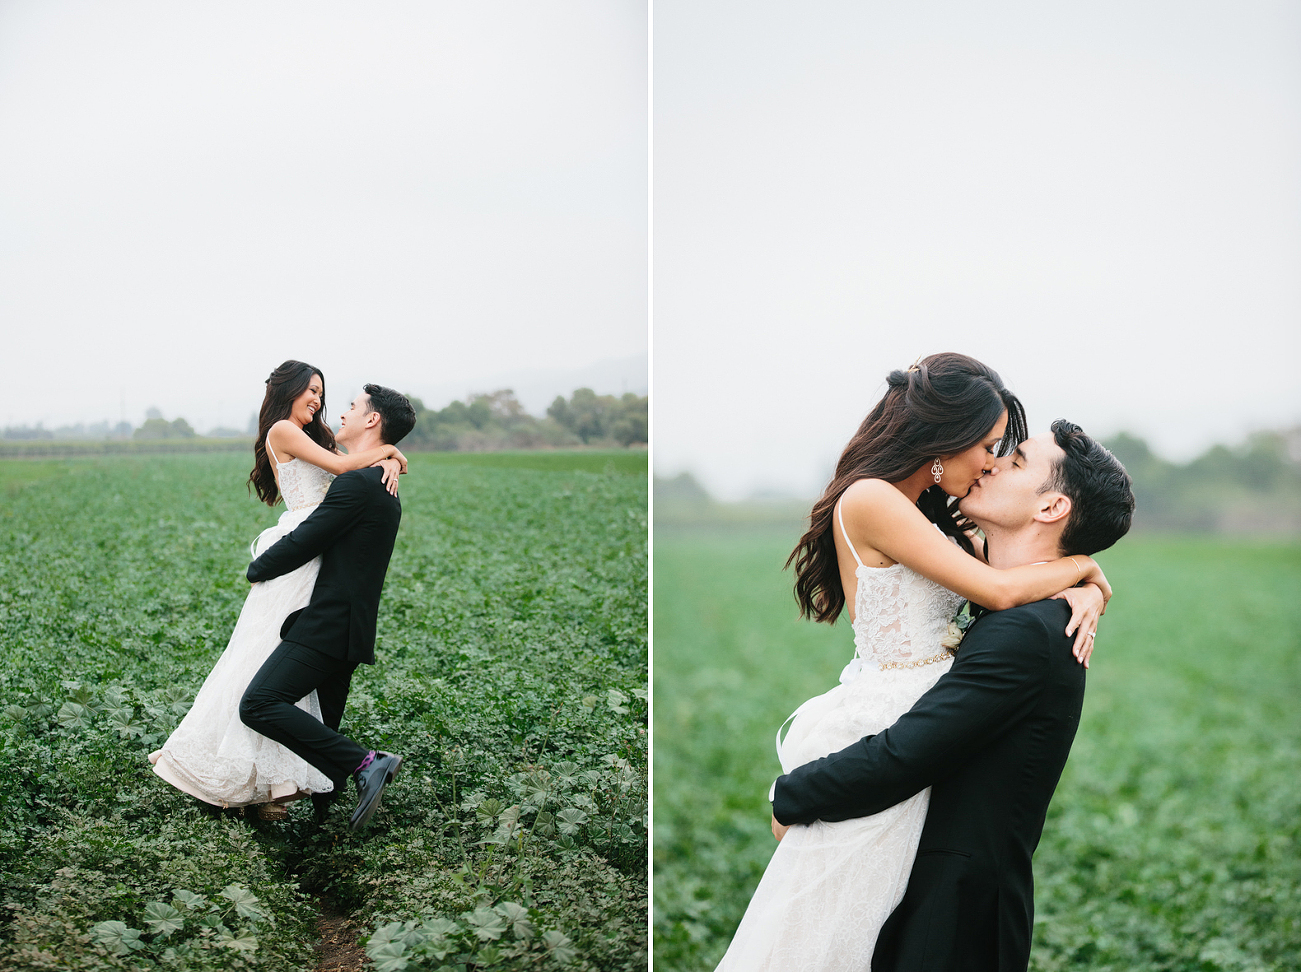 Ryan lifting up dana in a field of cilantro on their wedding day